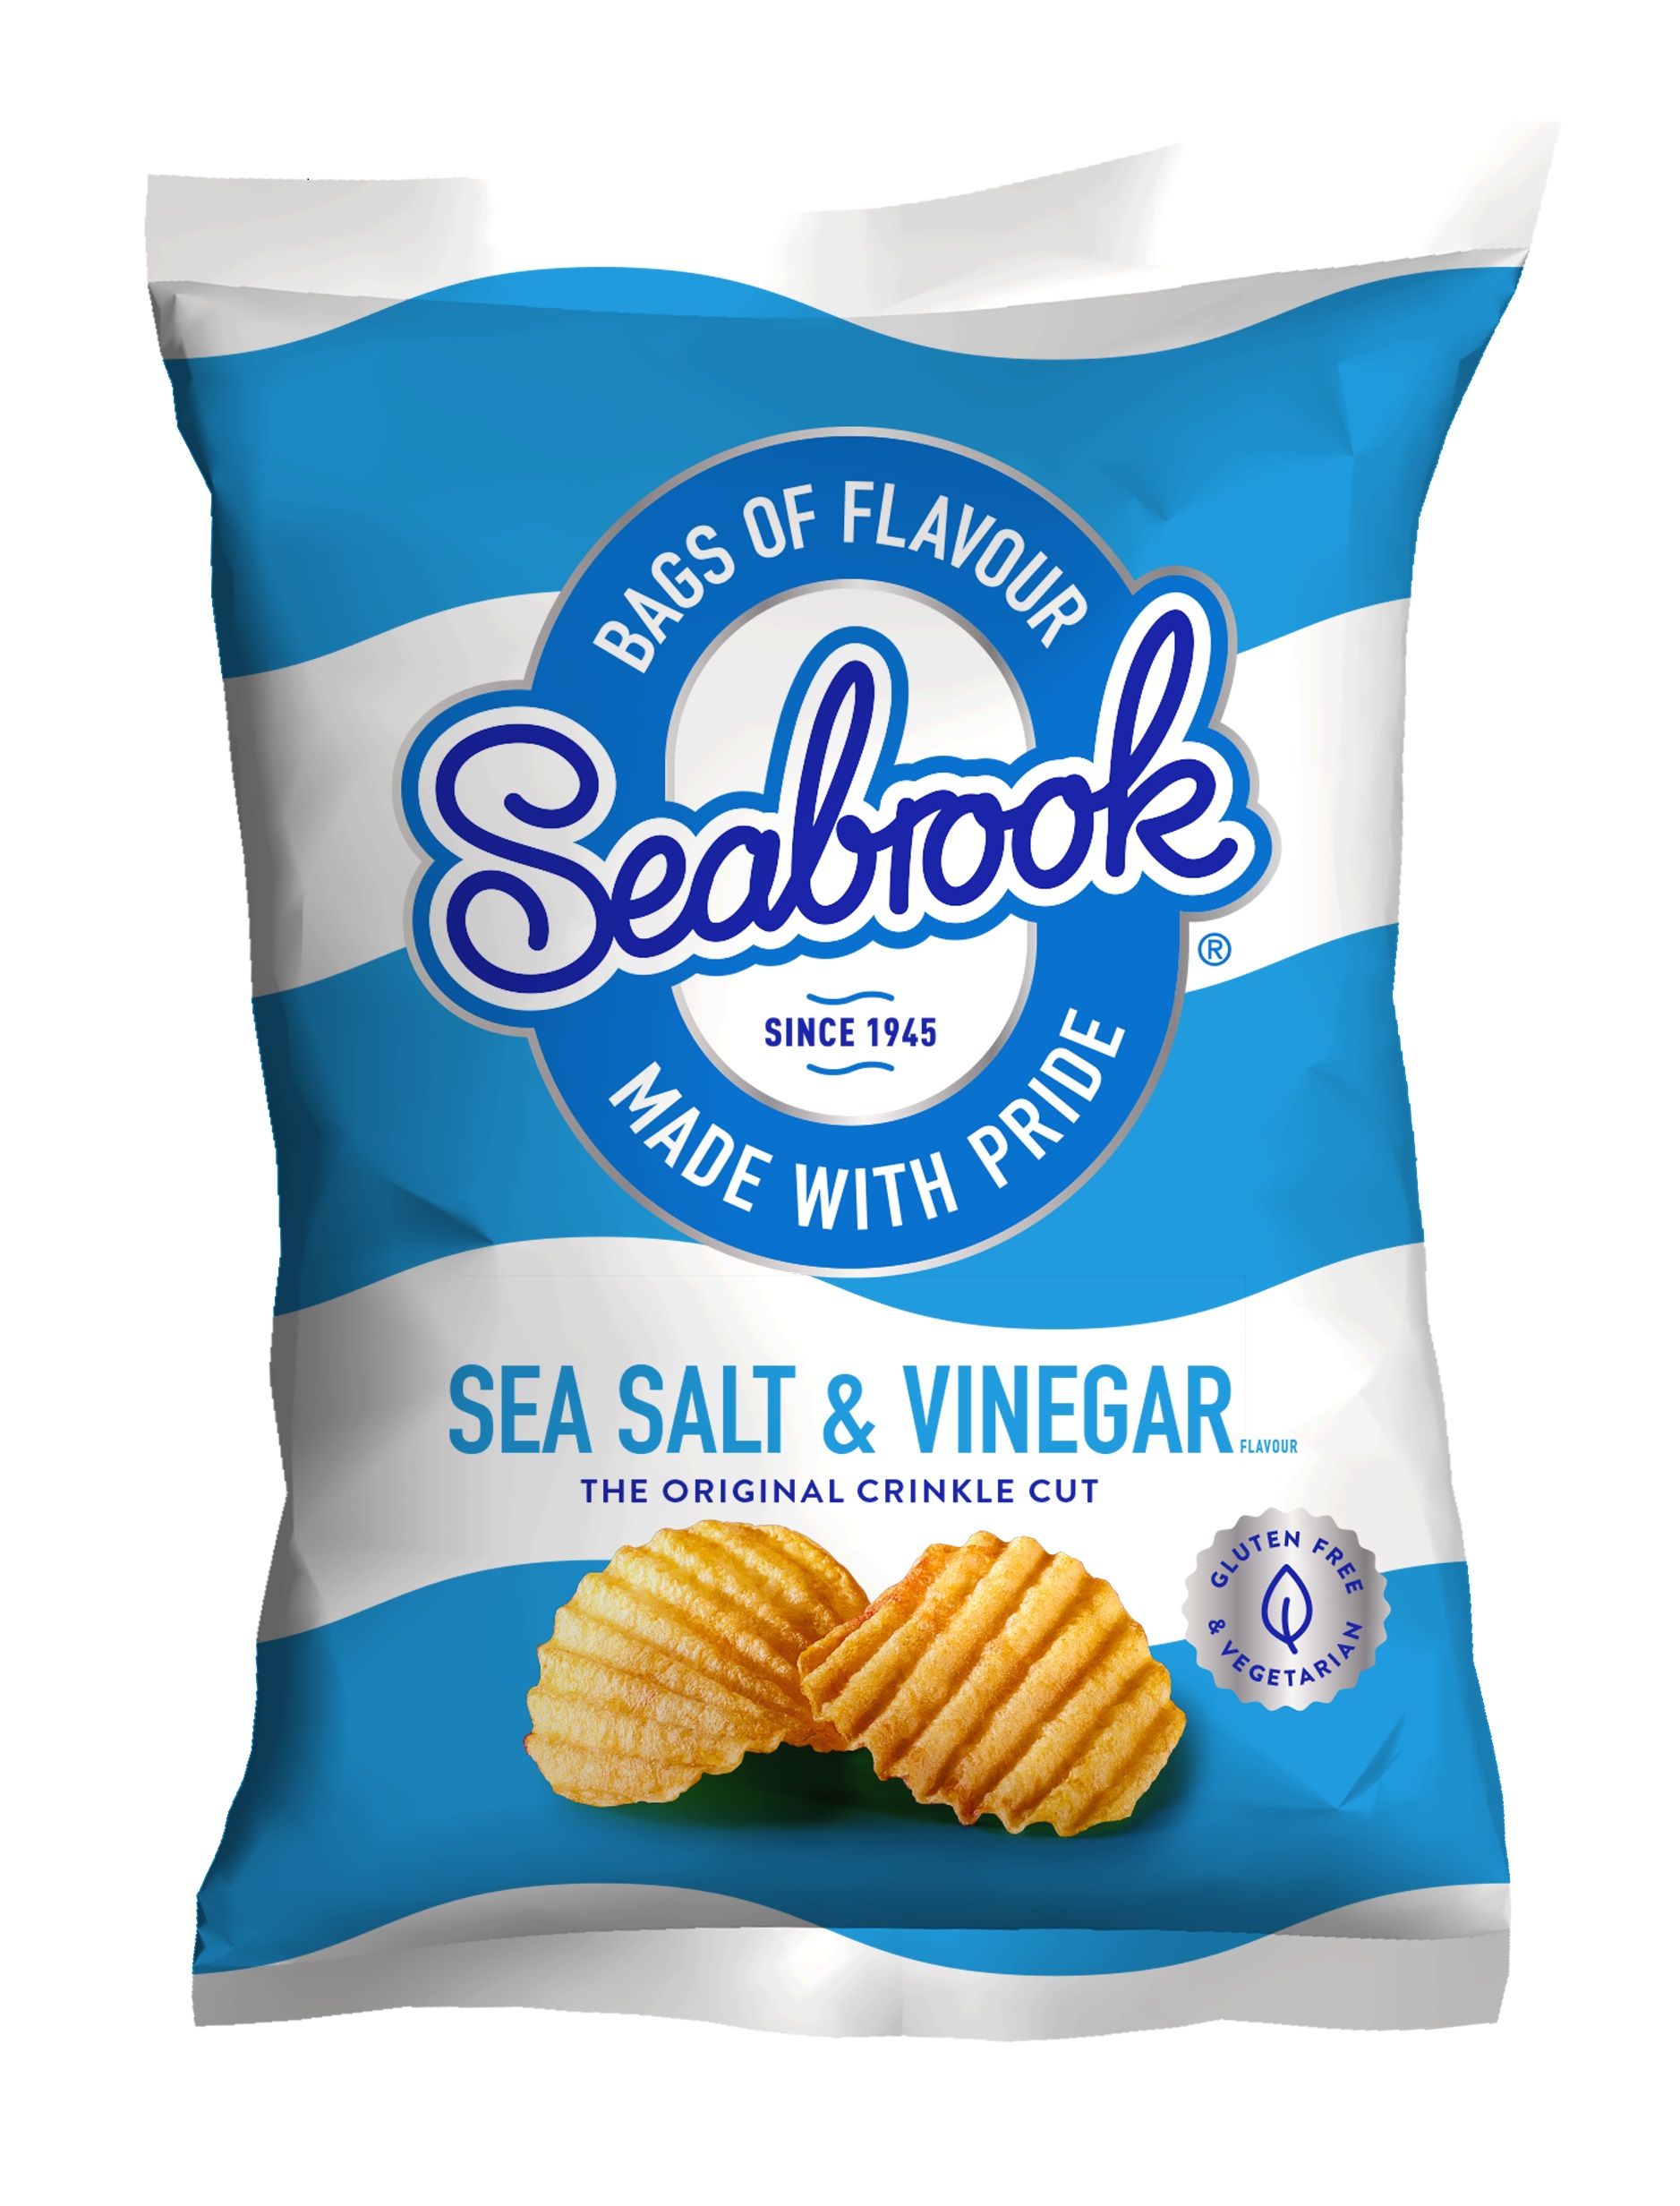 Seabrook Crisps now £74m brand purchased by 9m UK households